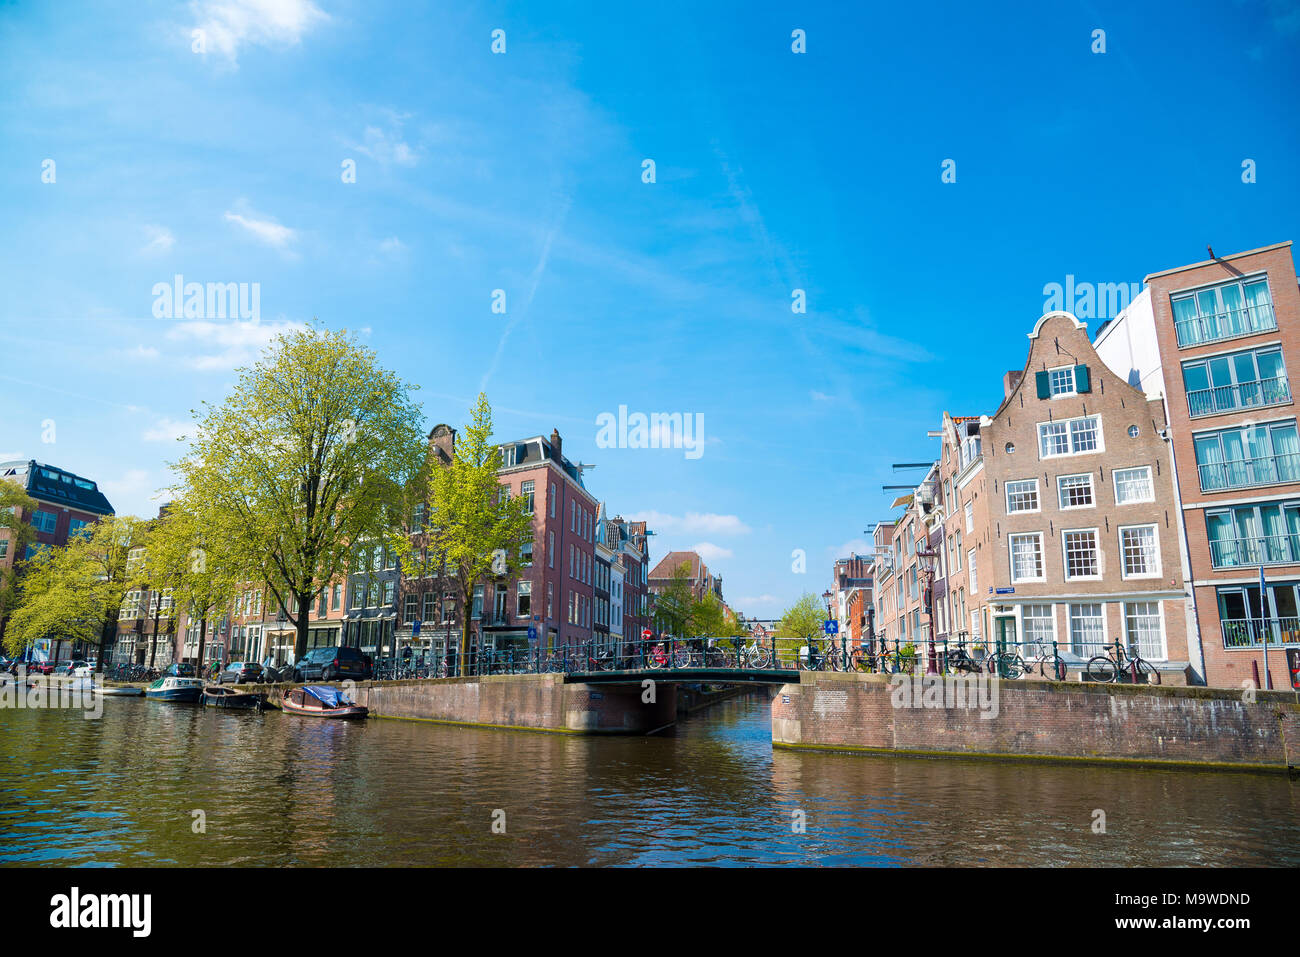 Amsterdam, Netherlands - April 20, 2017: Amsterdam canal and beautiful traditional old buildings, Netherlands Stock Photo